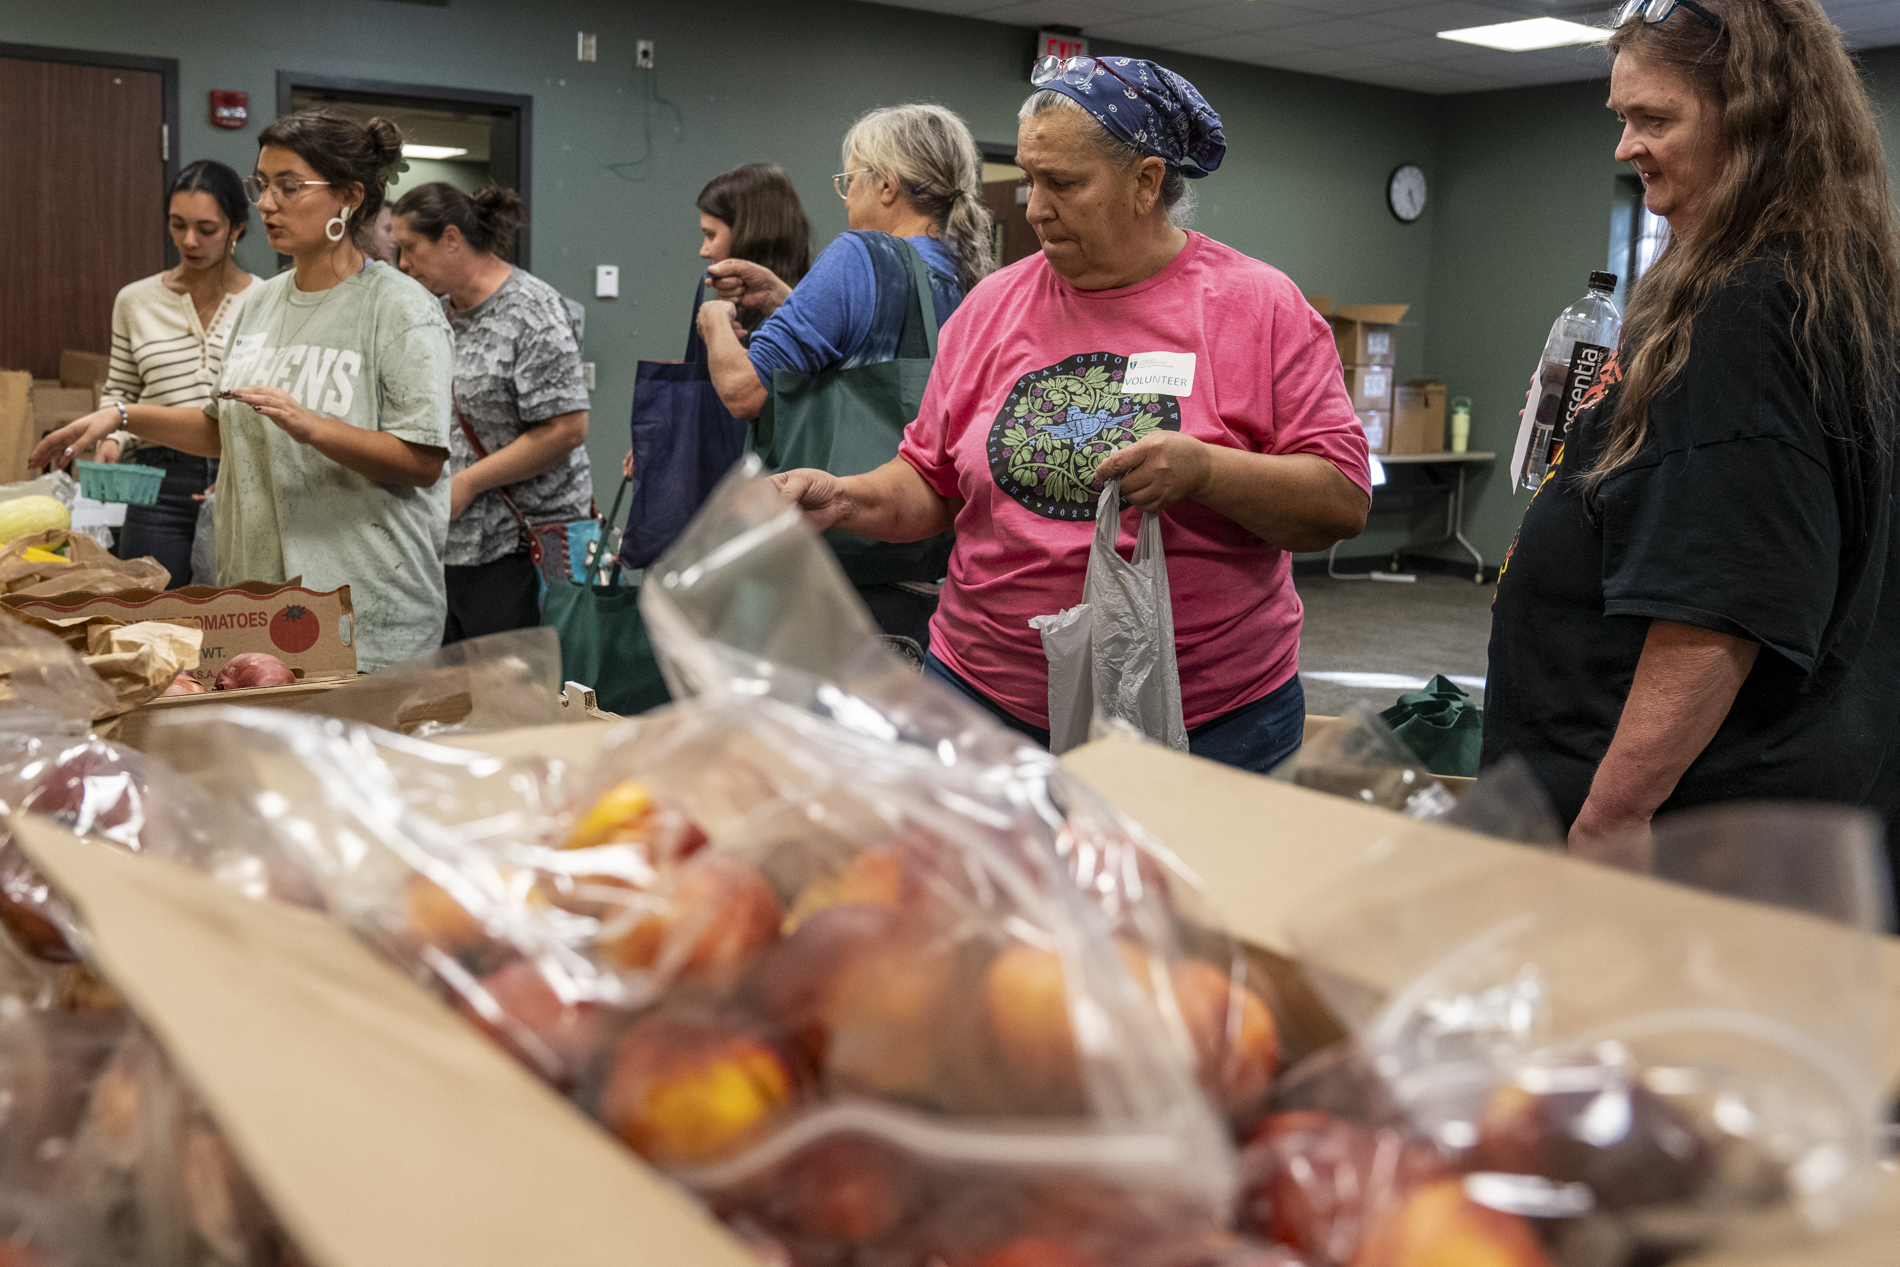 An image of people packing food at a food pantry. They are wearing gloves and working over a table.